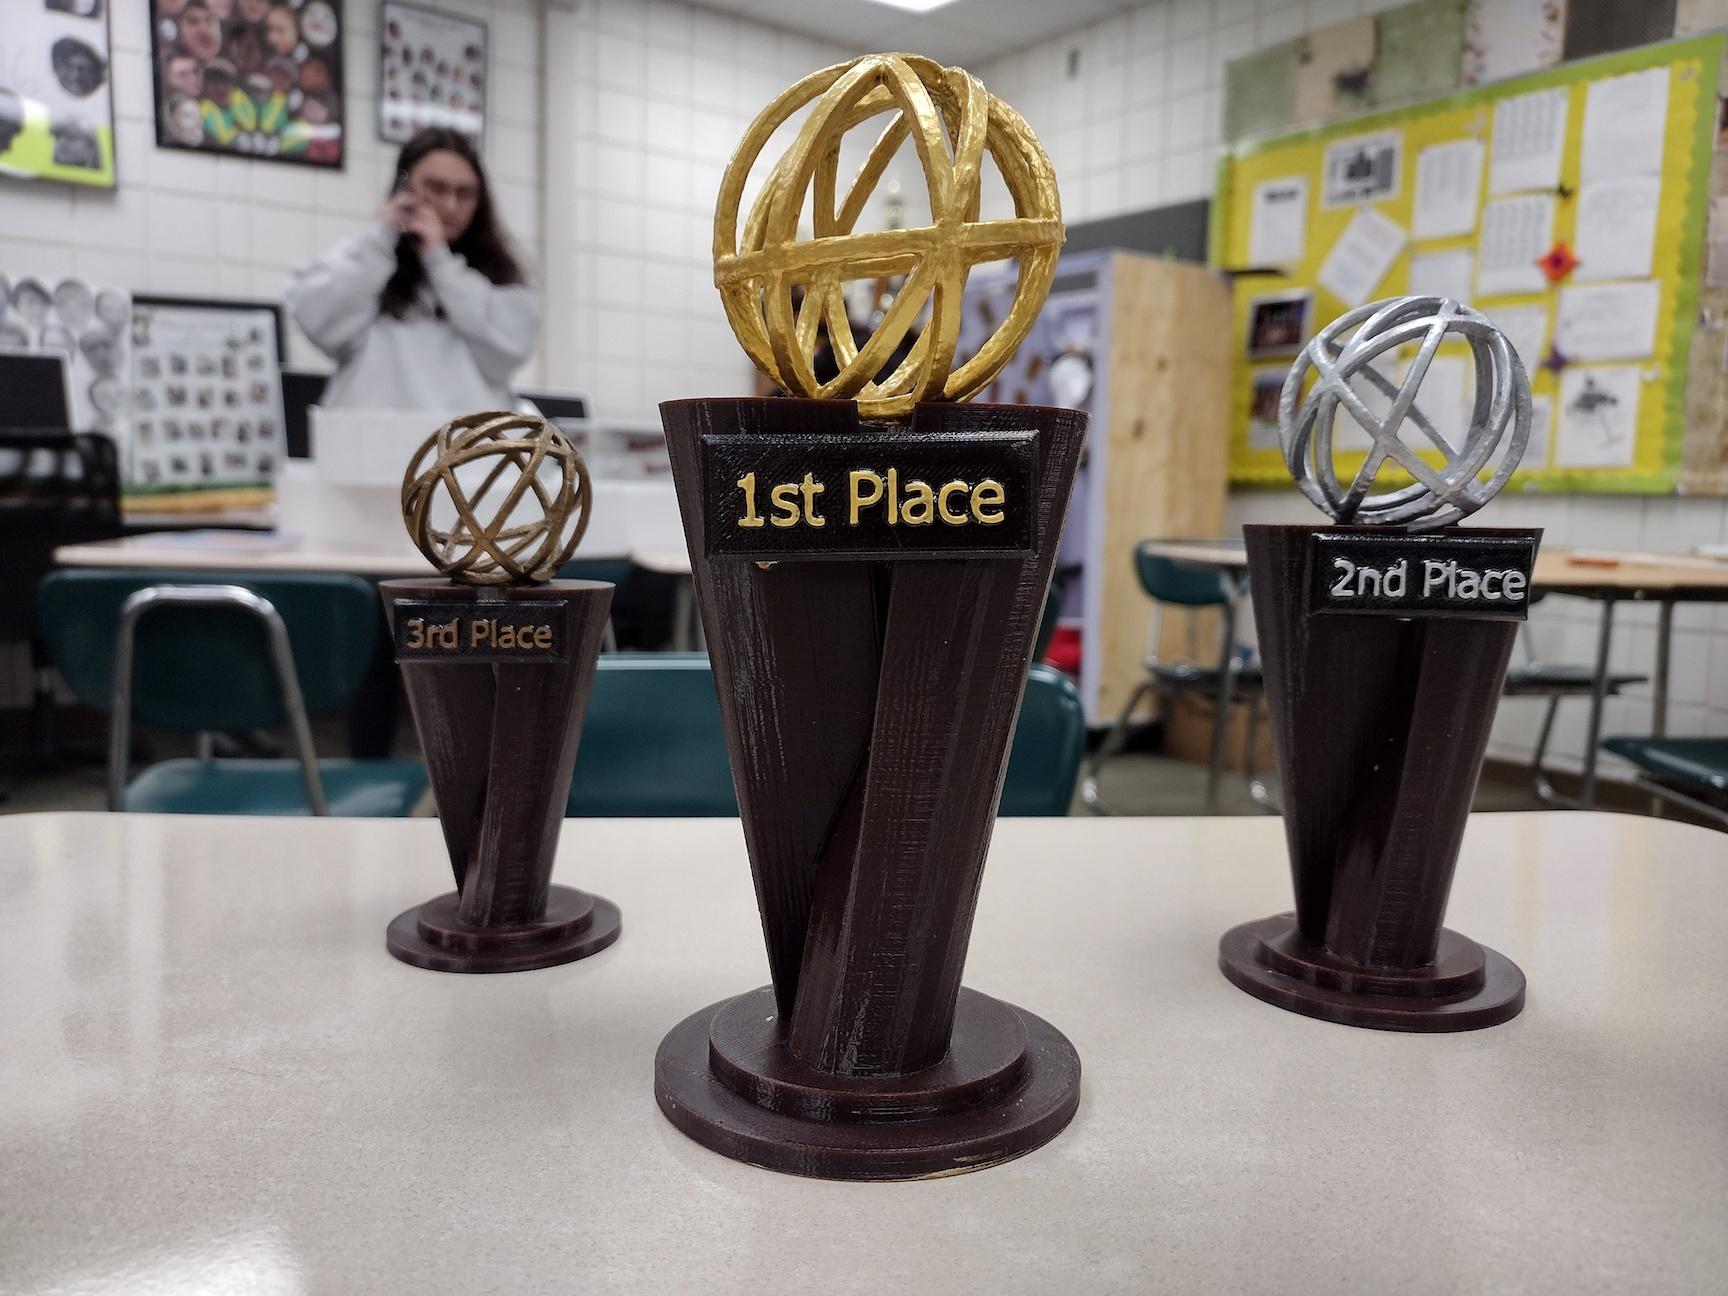 The trophies designed by Gregory Maynard